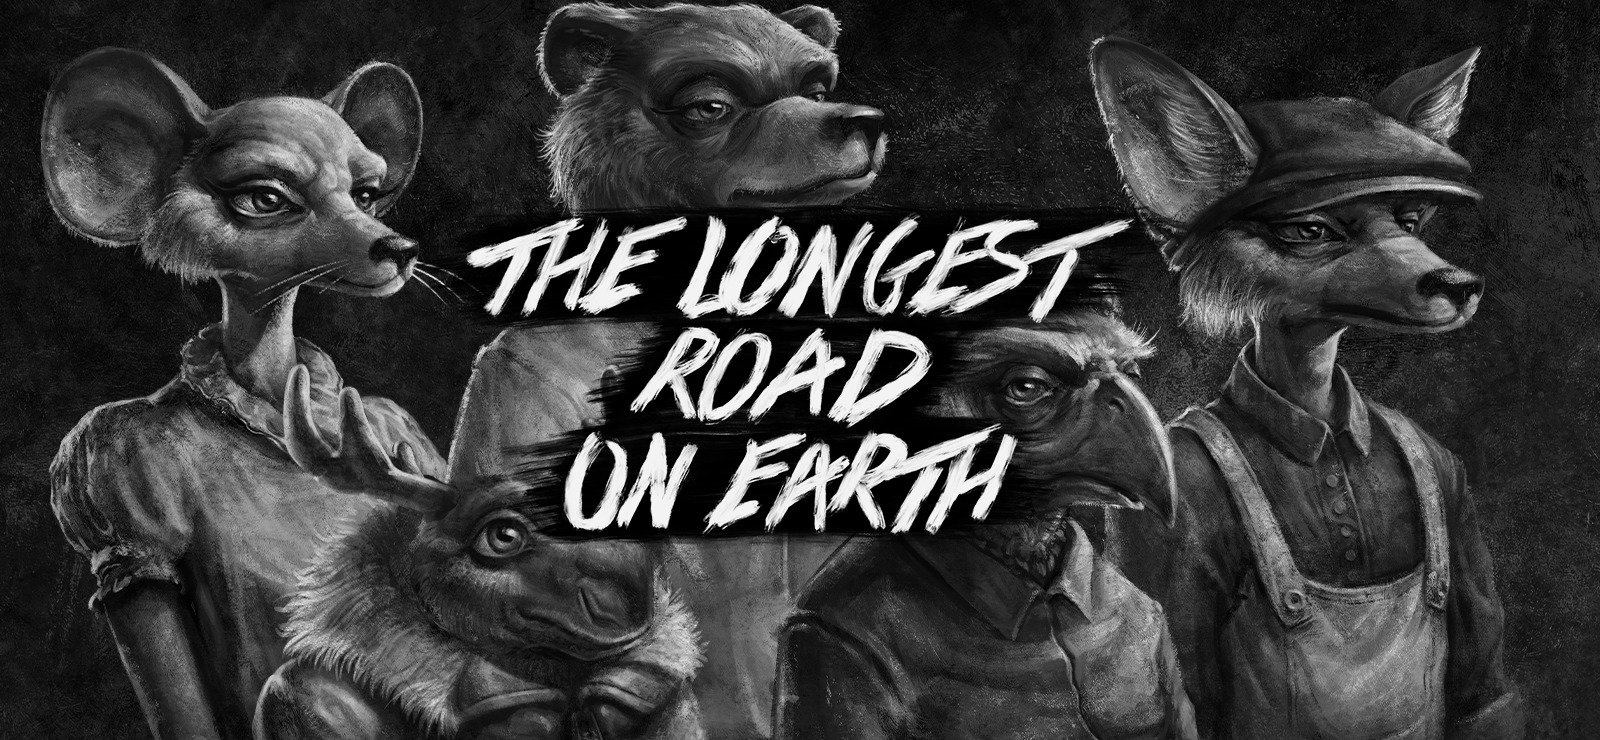 The Longest Road on Earth 8